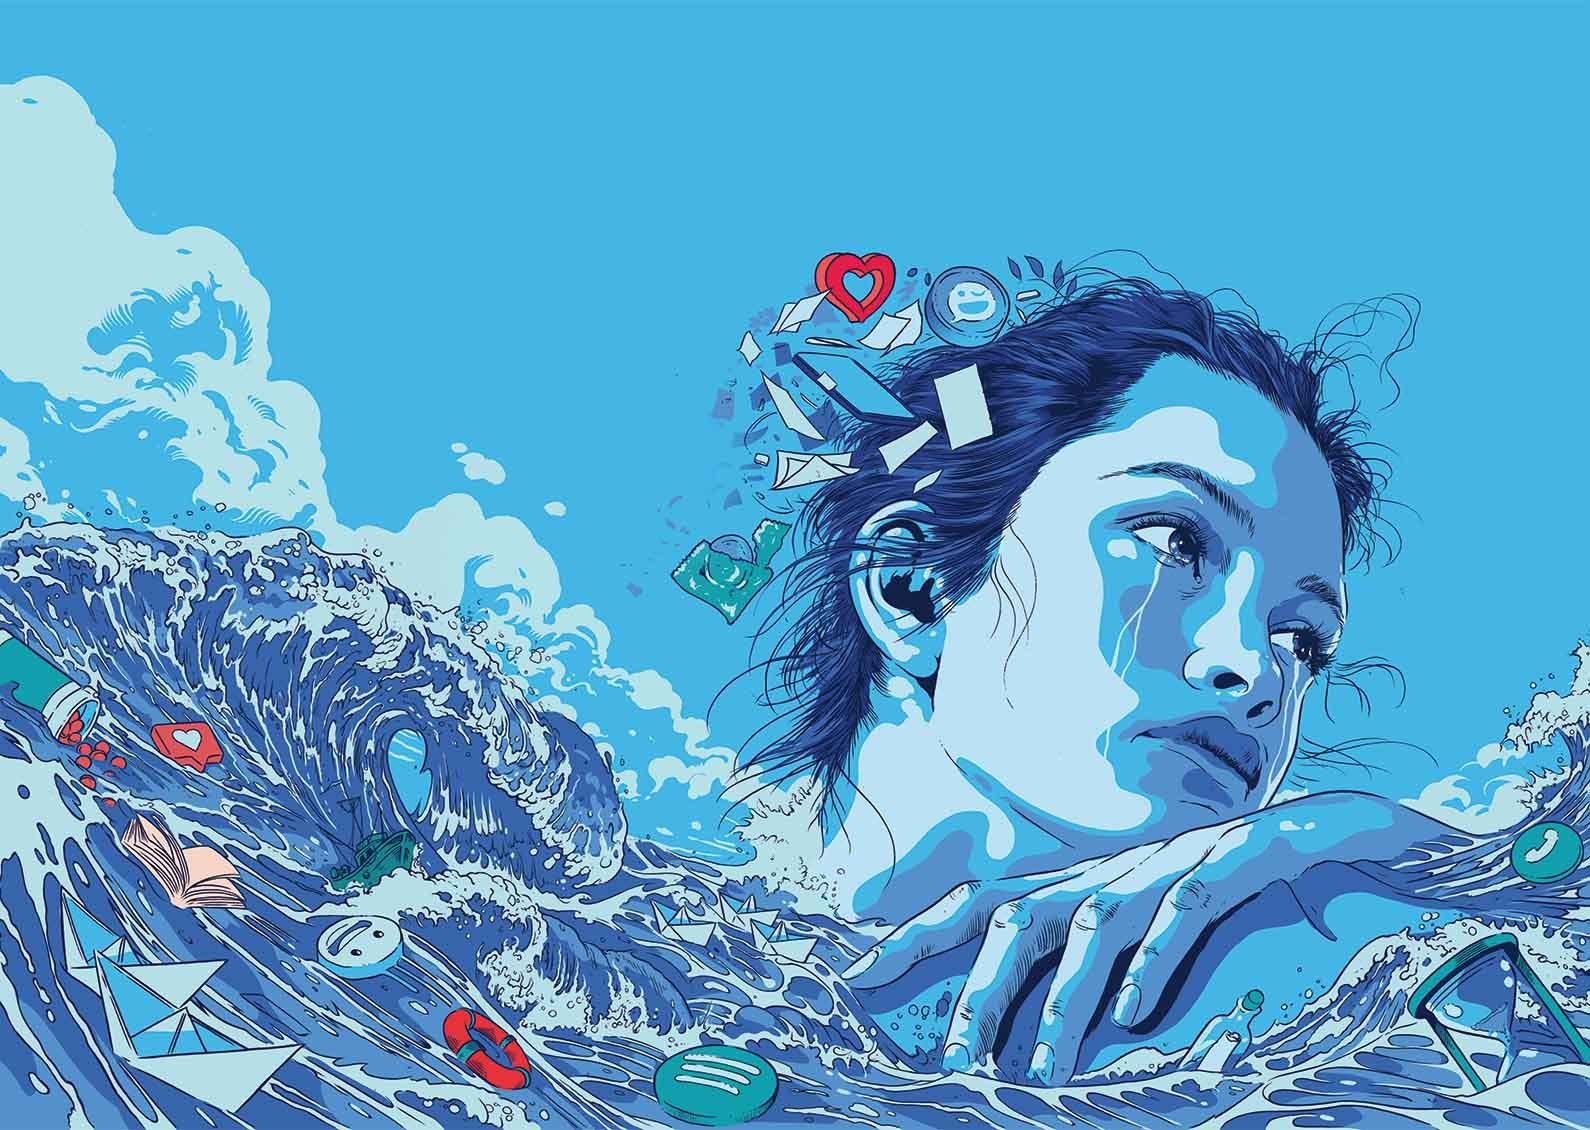 Illustration of a teenage girl in an ocean; thoughts come out of her head of papers, a heart, a cell phone, a happy face emoji, a condom and in the sea floats pills, a book, a ship, paper boats, emojis, and "like" icons.